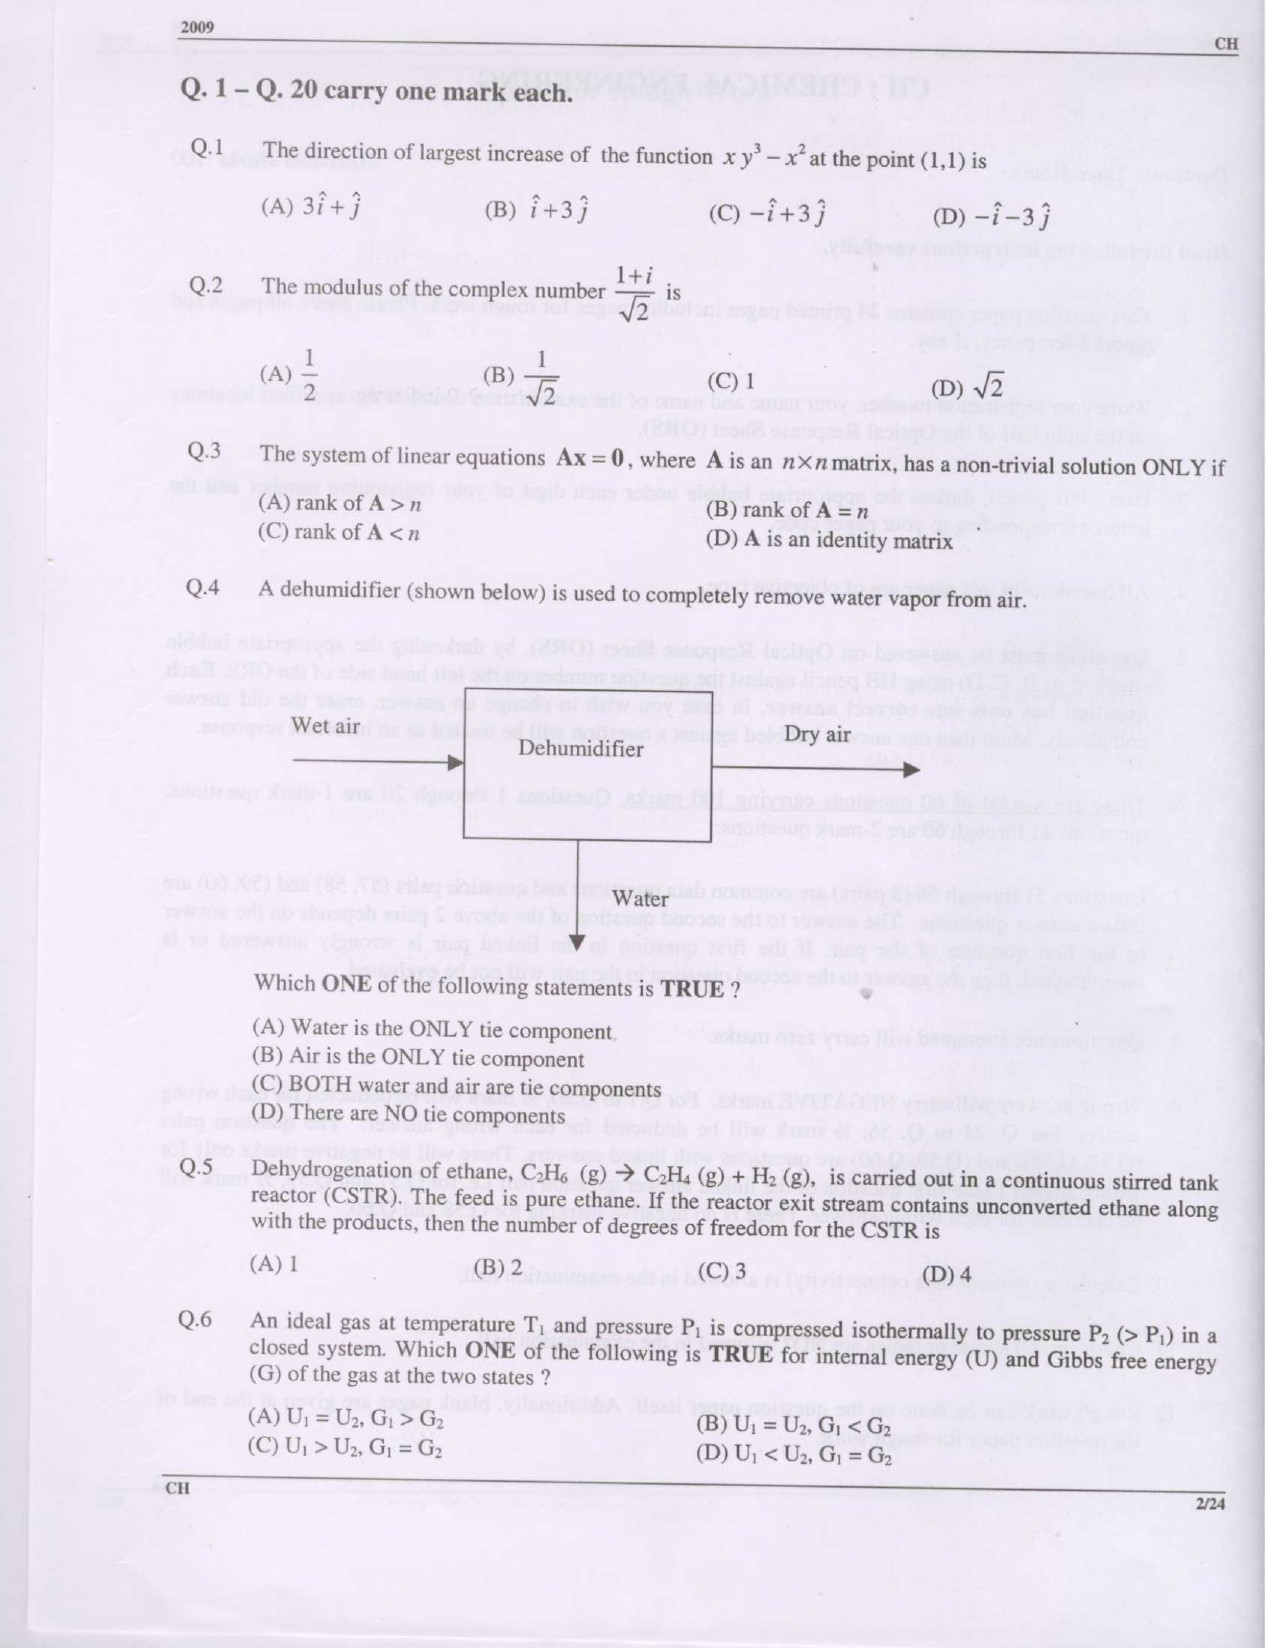 GATE Exam Question Paper 2009 Chemical Engineering 2